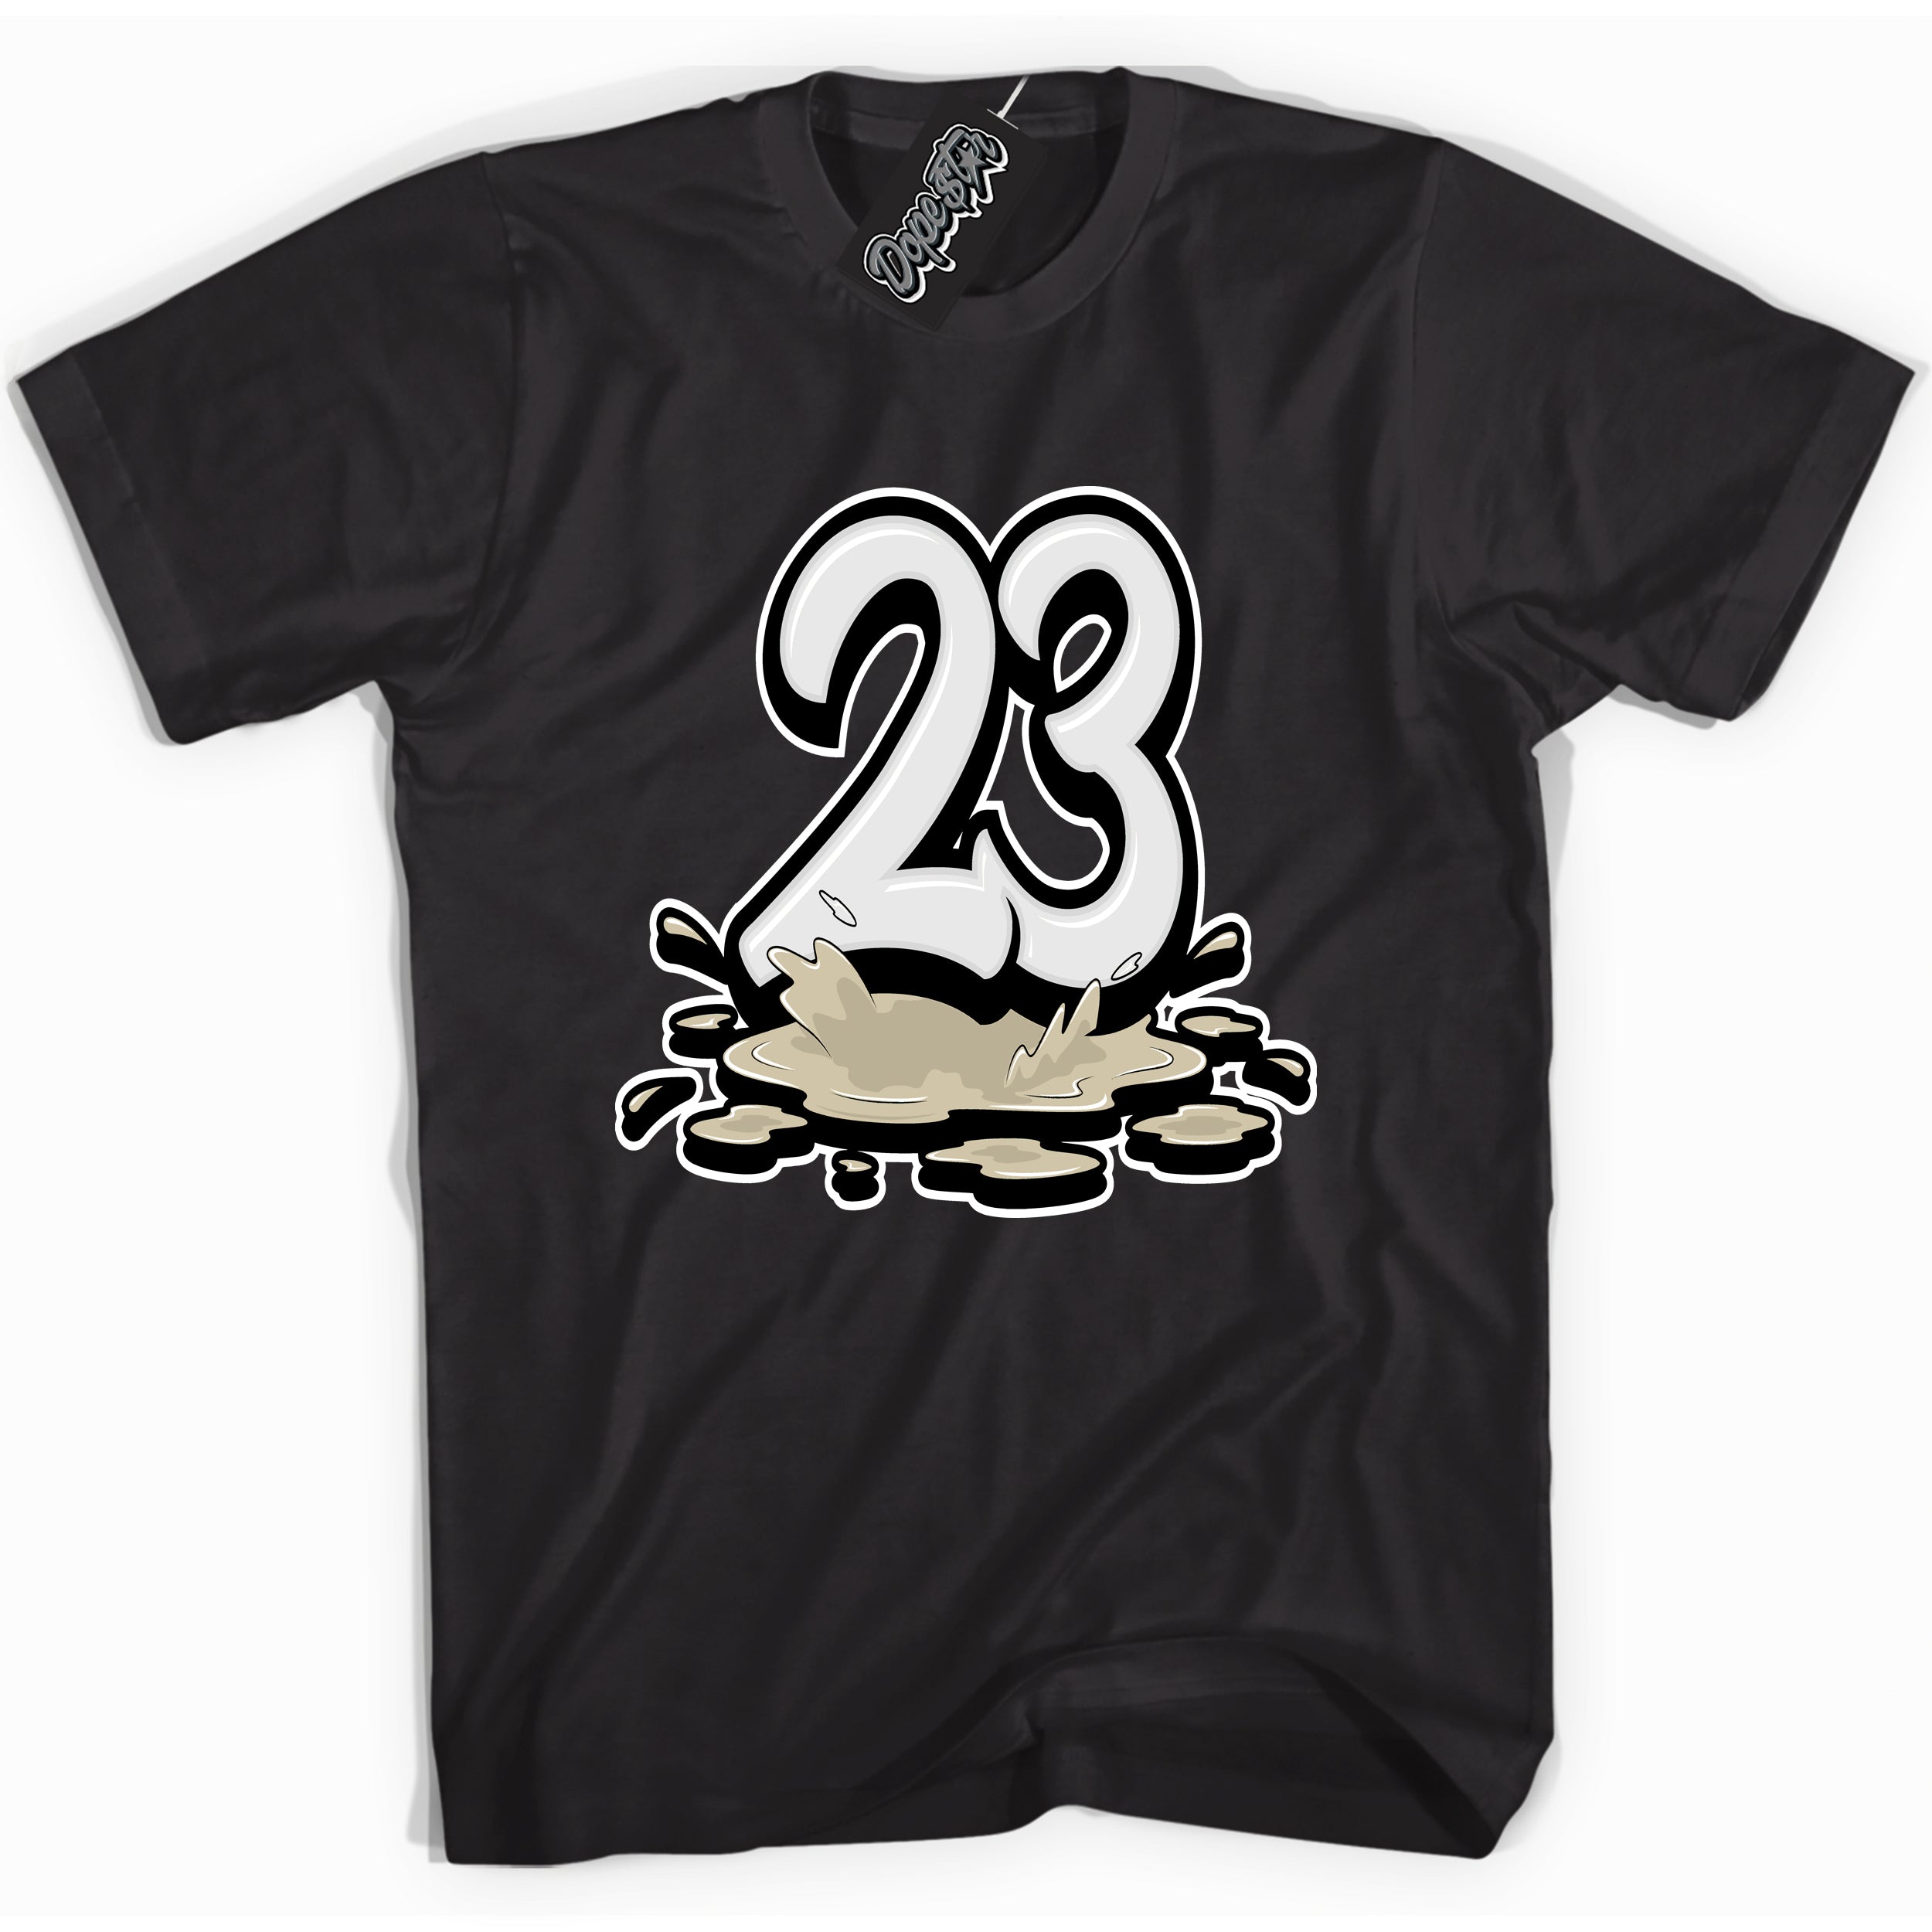 Cool Black graphic tee with “ 23 Melting  ” print, that perfectly matches GRATITUDE 11s  sneakers 